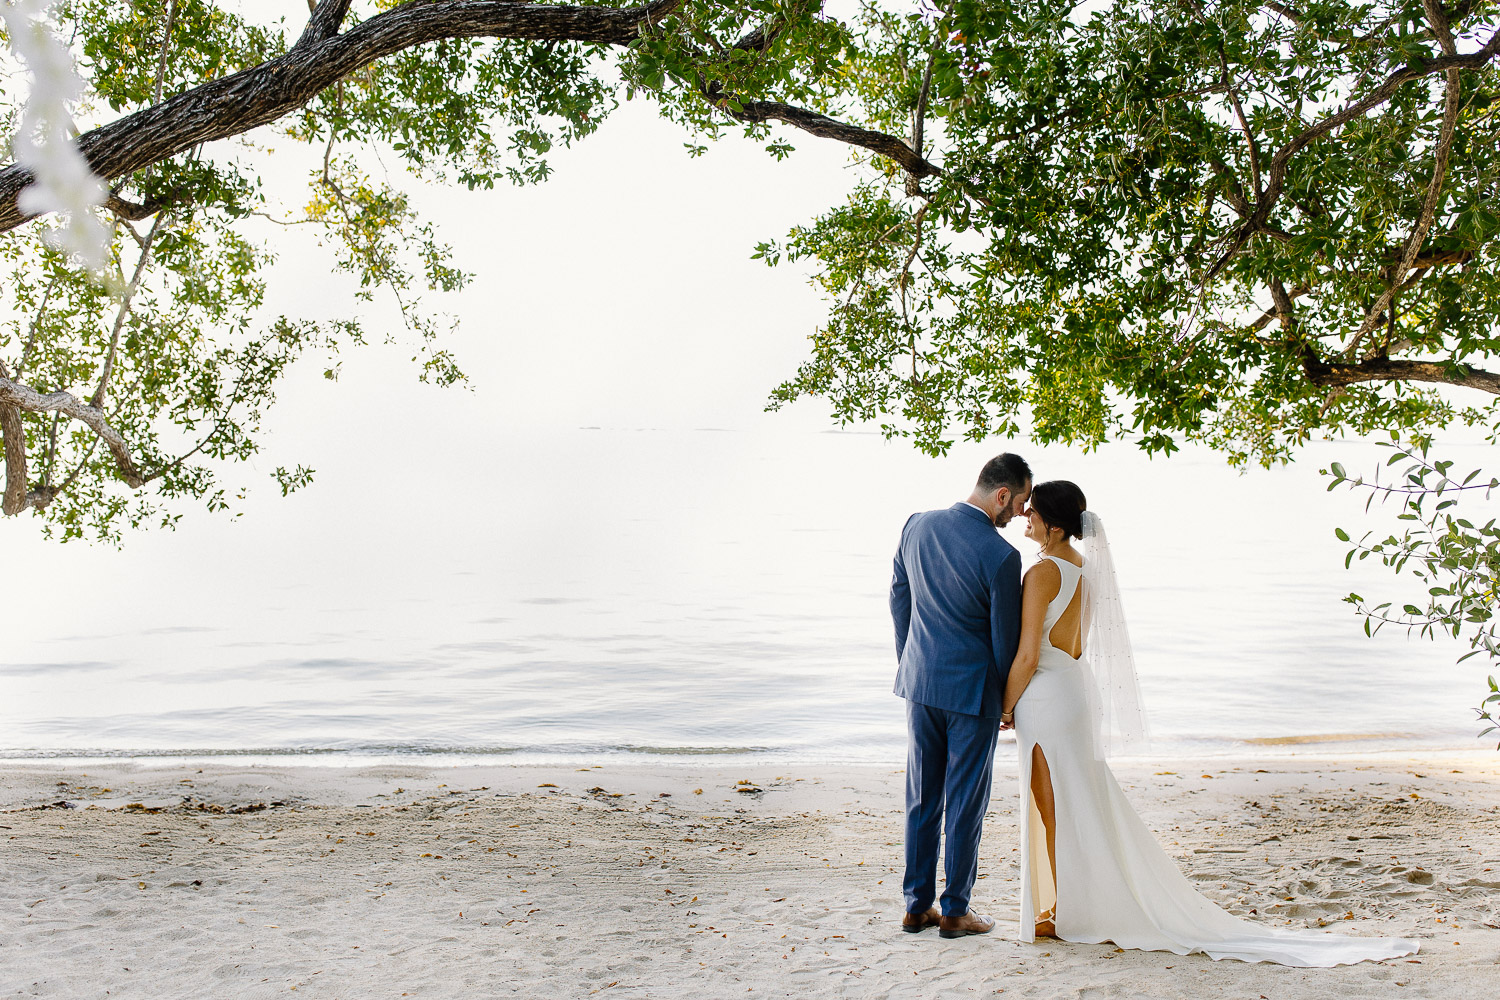 The bride and groom just married at Baker's cay resort in Key Largo